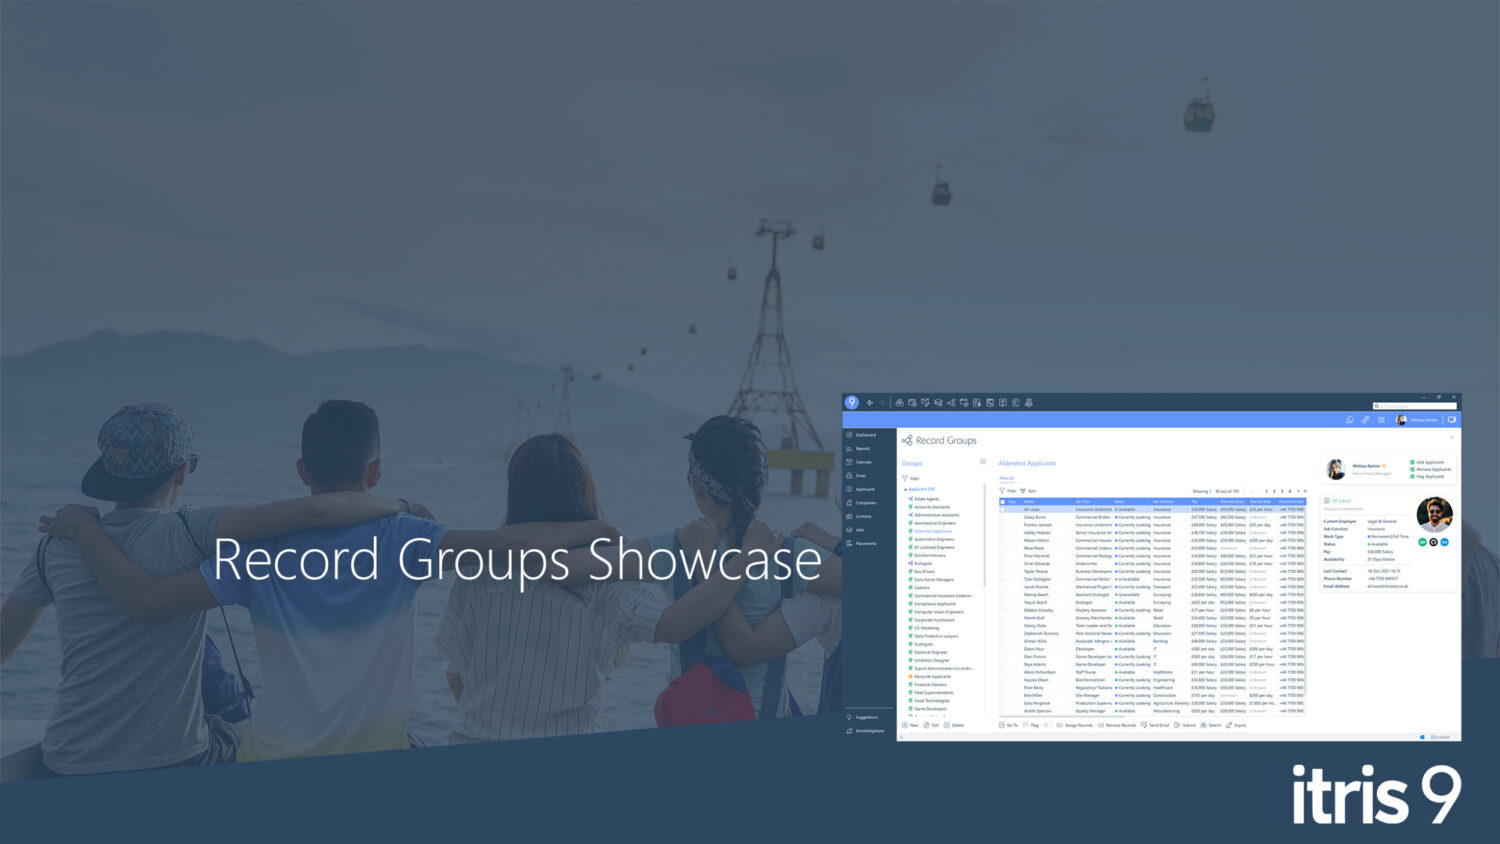 Recruitment CRM software itris 9 | Record Groups | Showcase Video